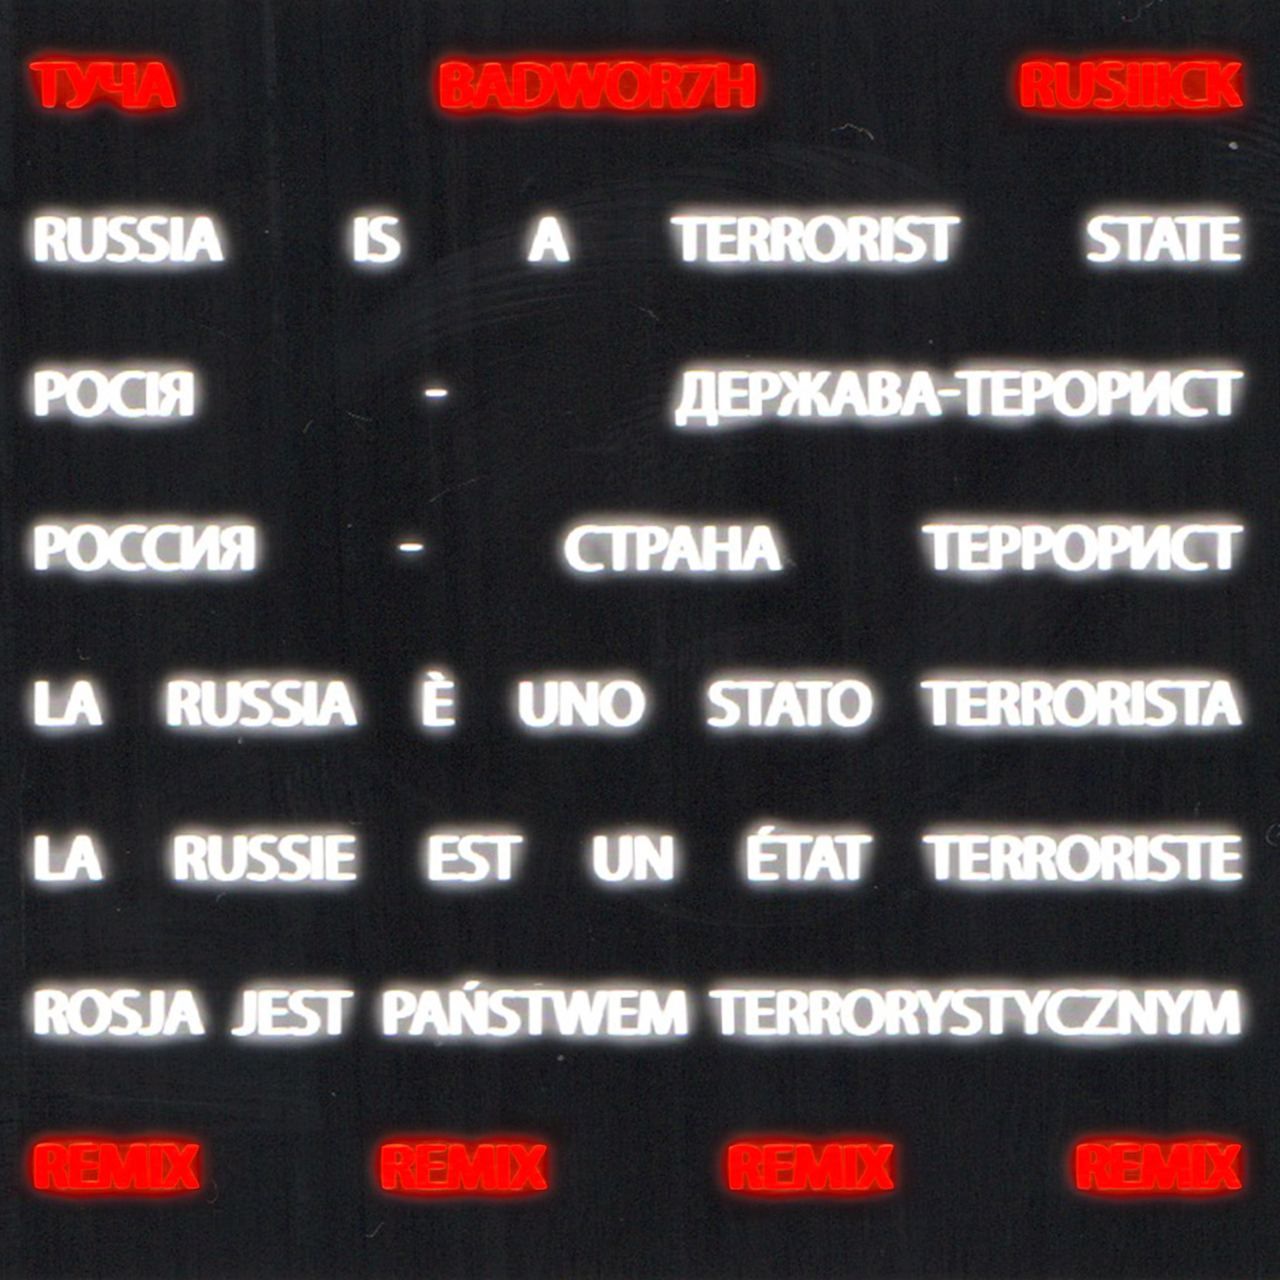 Télécharger ТУЧА – russia is a terrorist state (BADWOR7H Remix) - feat. RUSIIICK